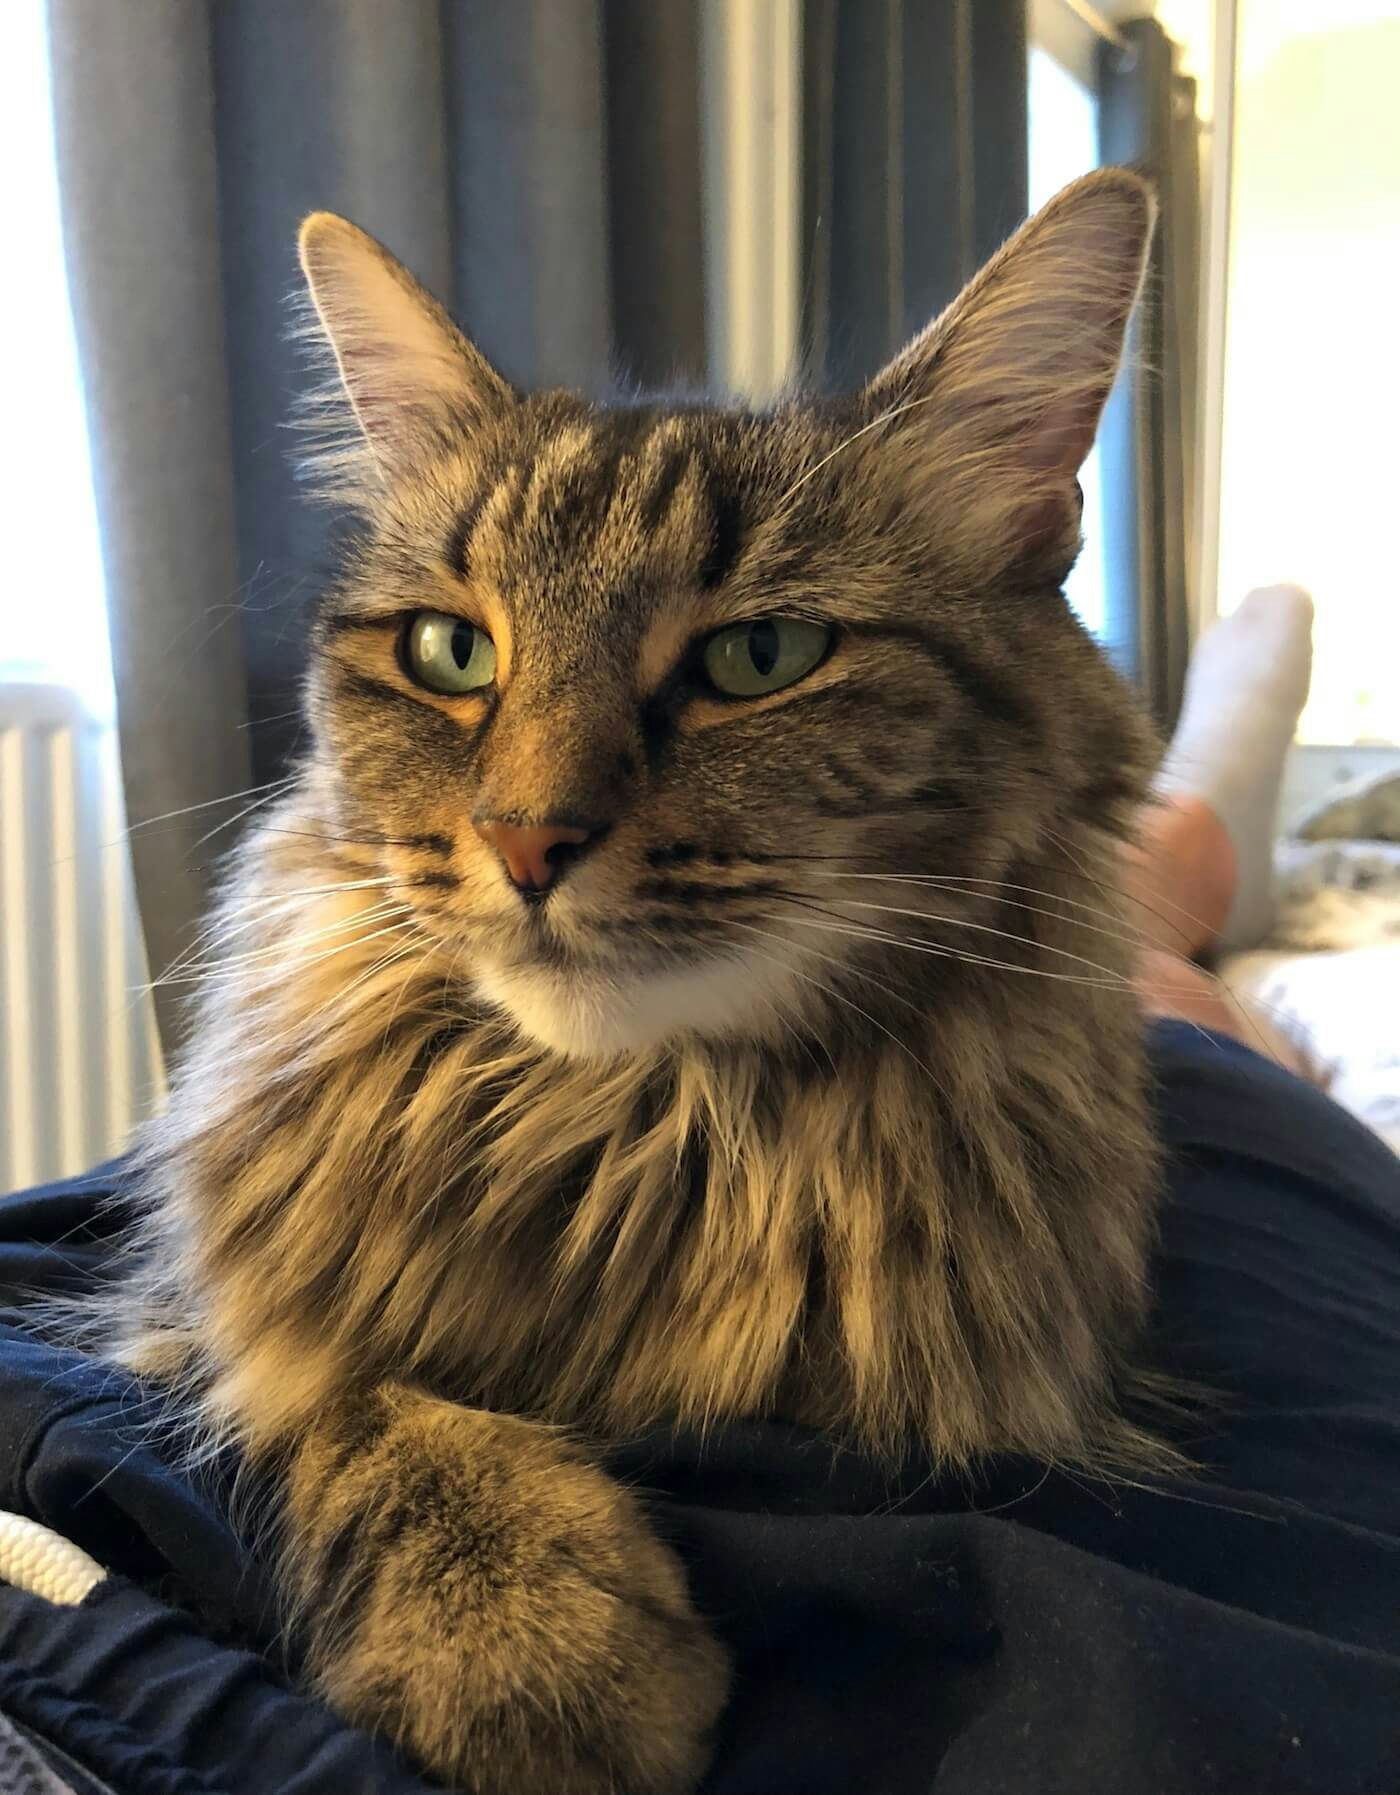 Delilah, a stripey, fluffy cat, sat on my lap looking majestic